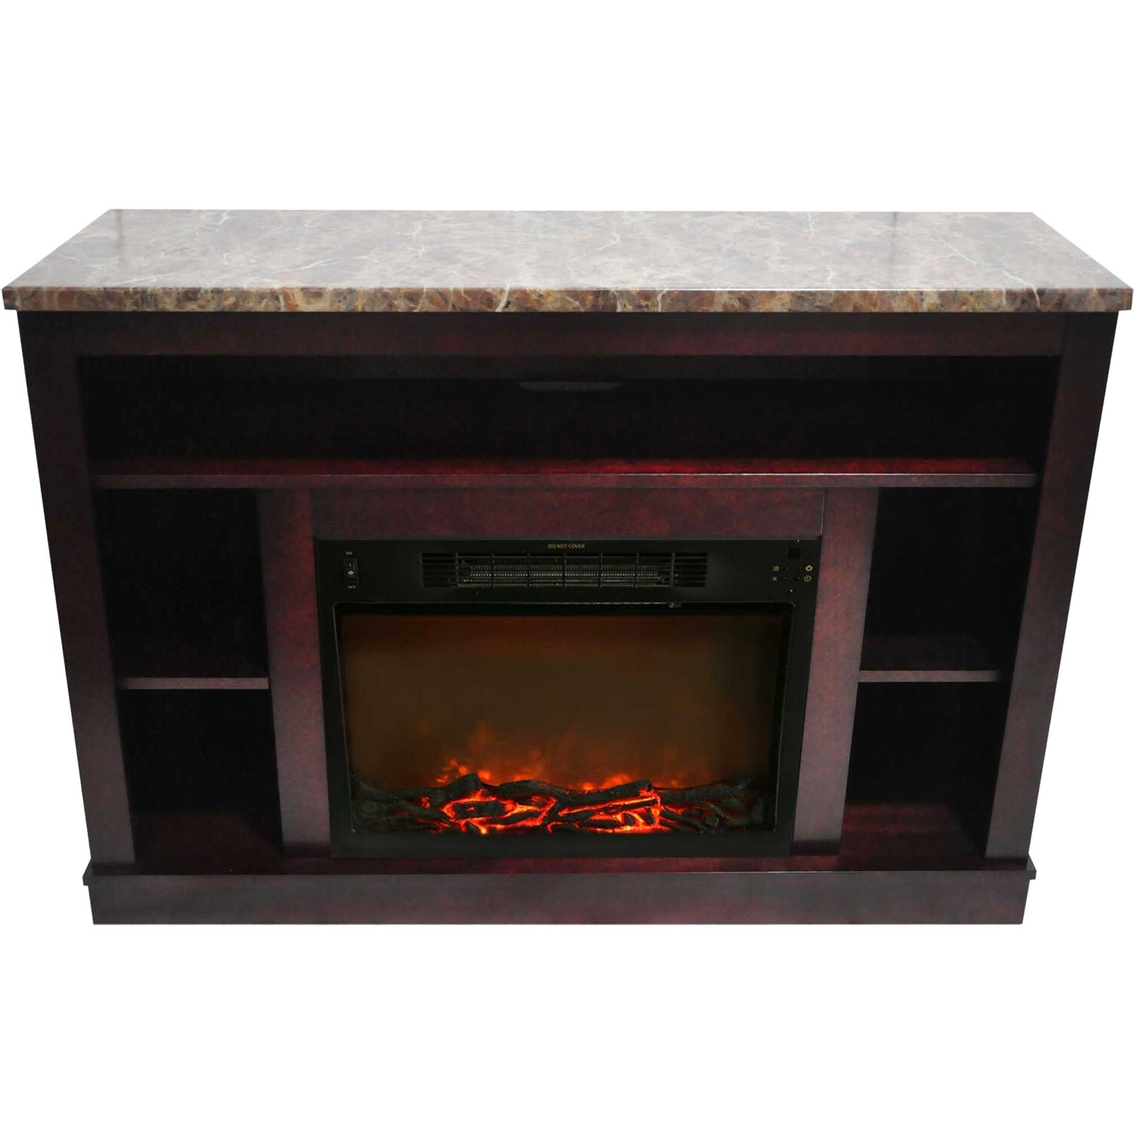 Cambridge Seville 47 in. Electric Fireplace Heater with Mahogany Mantel - Image 4 of 7